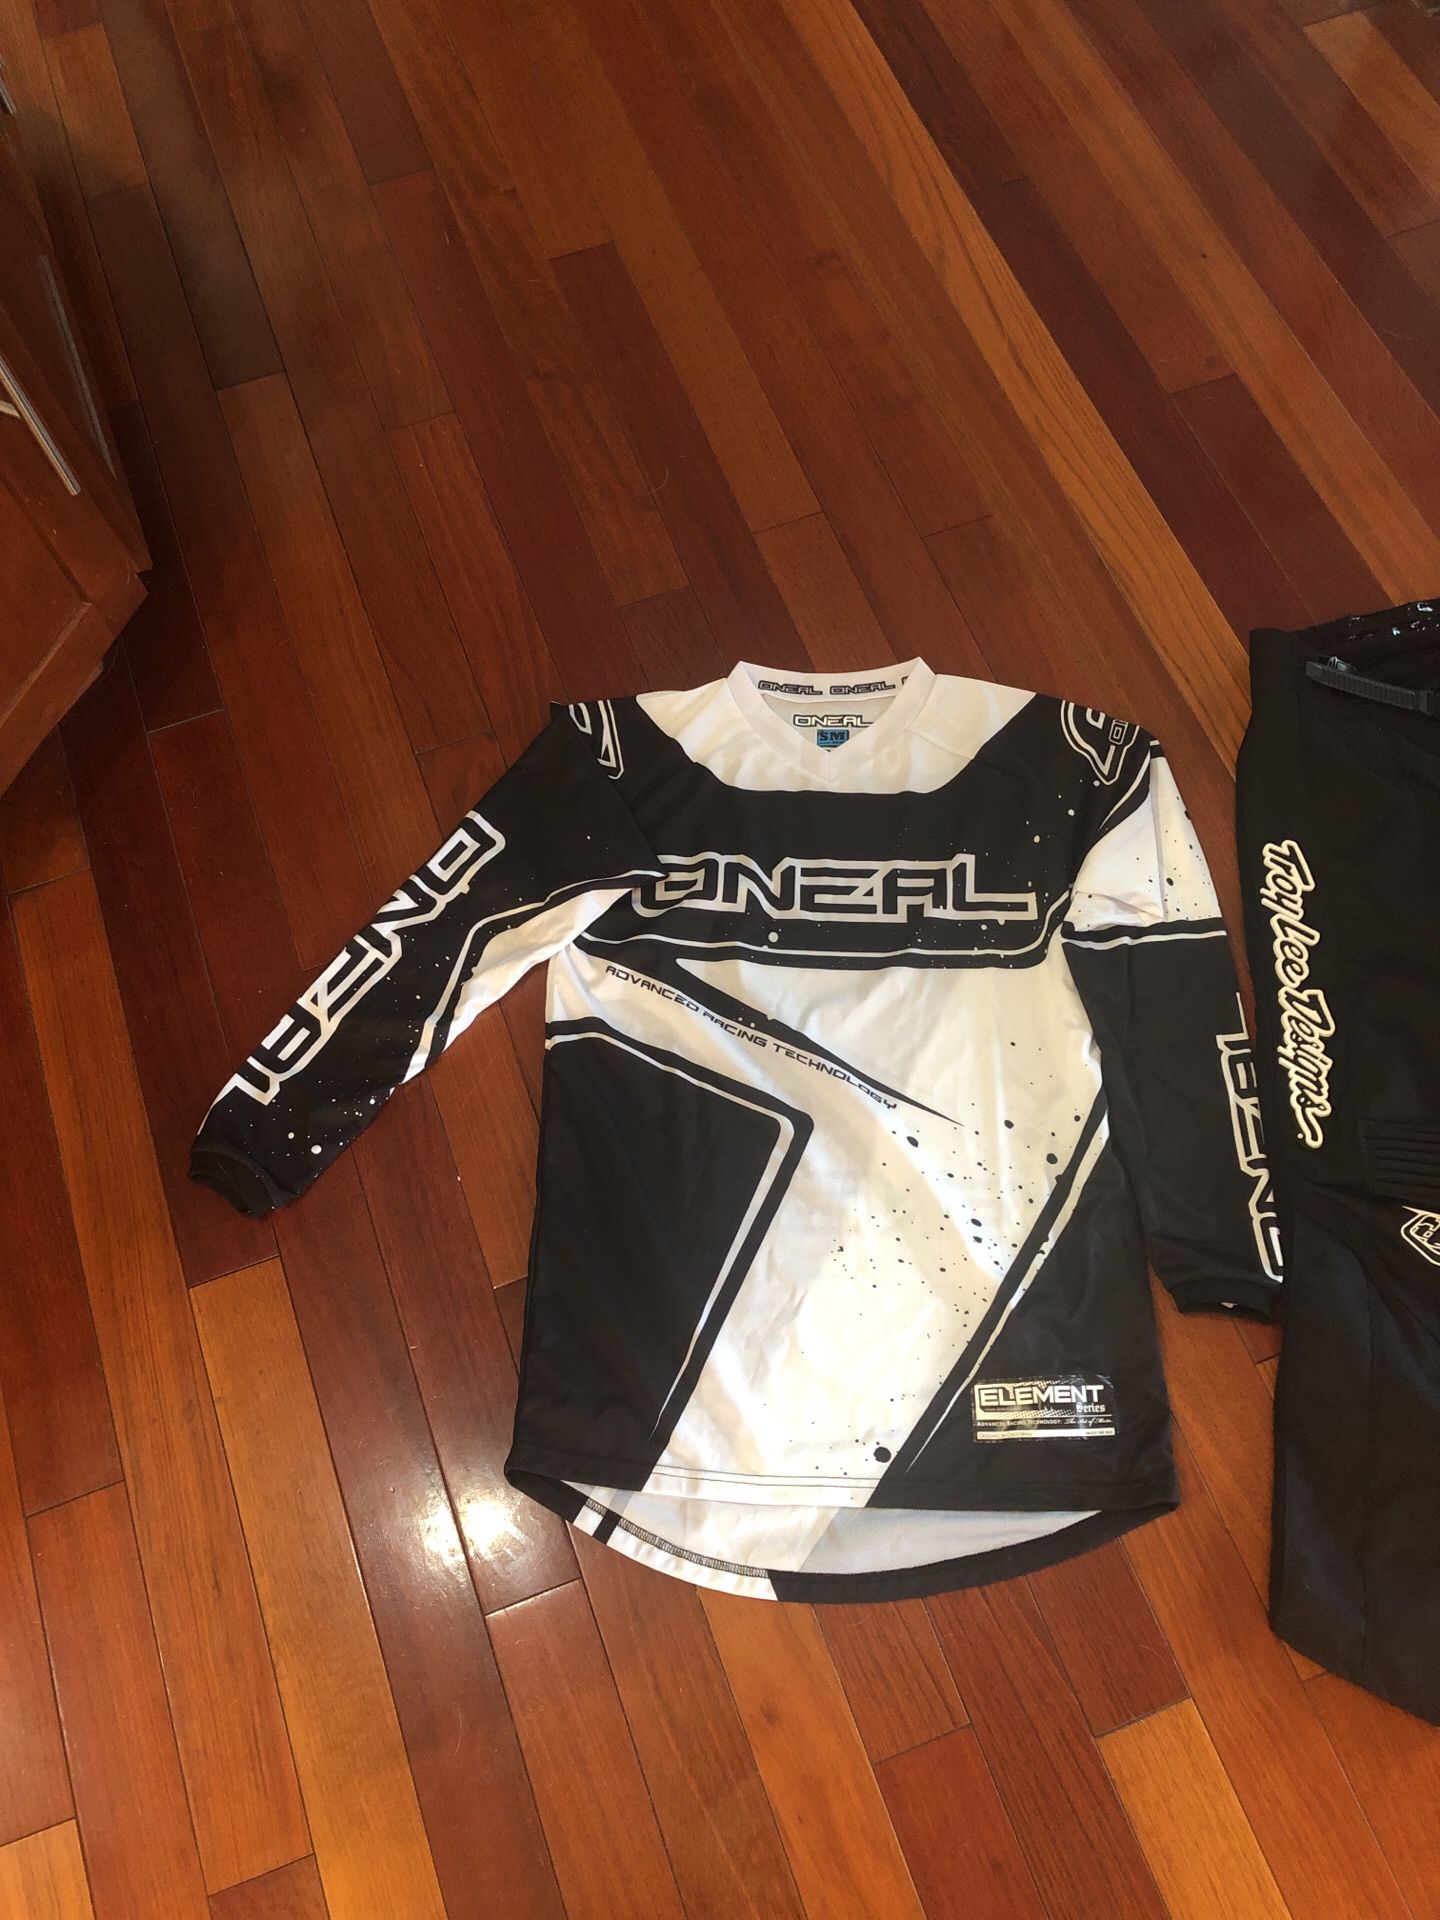 ONEAL shirt and pants for motocross